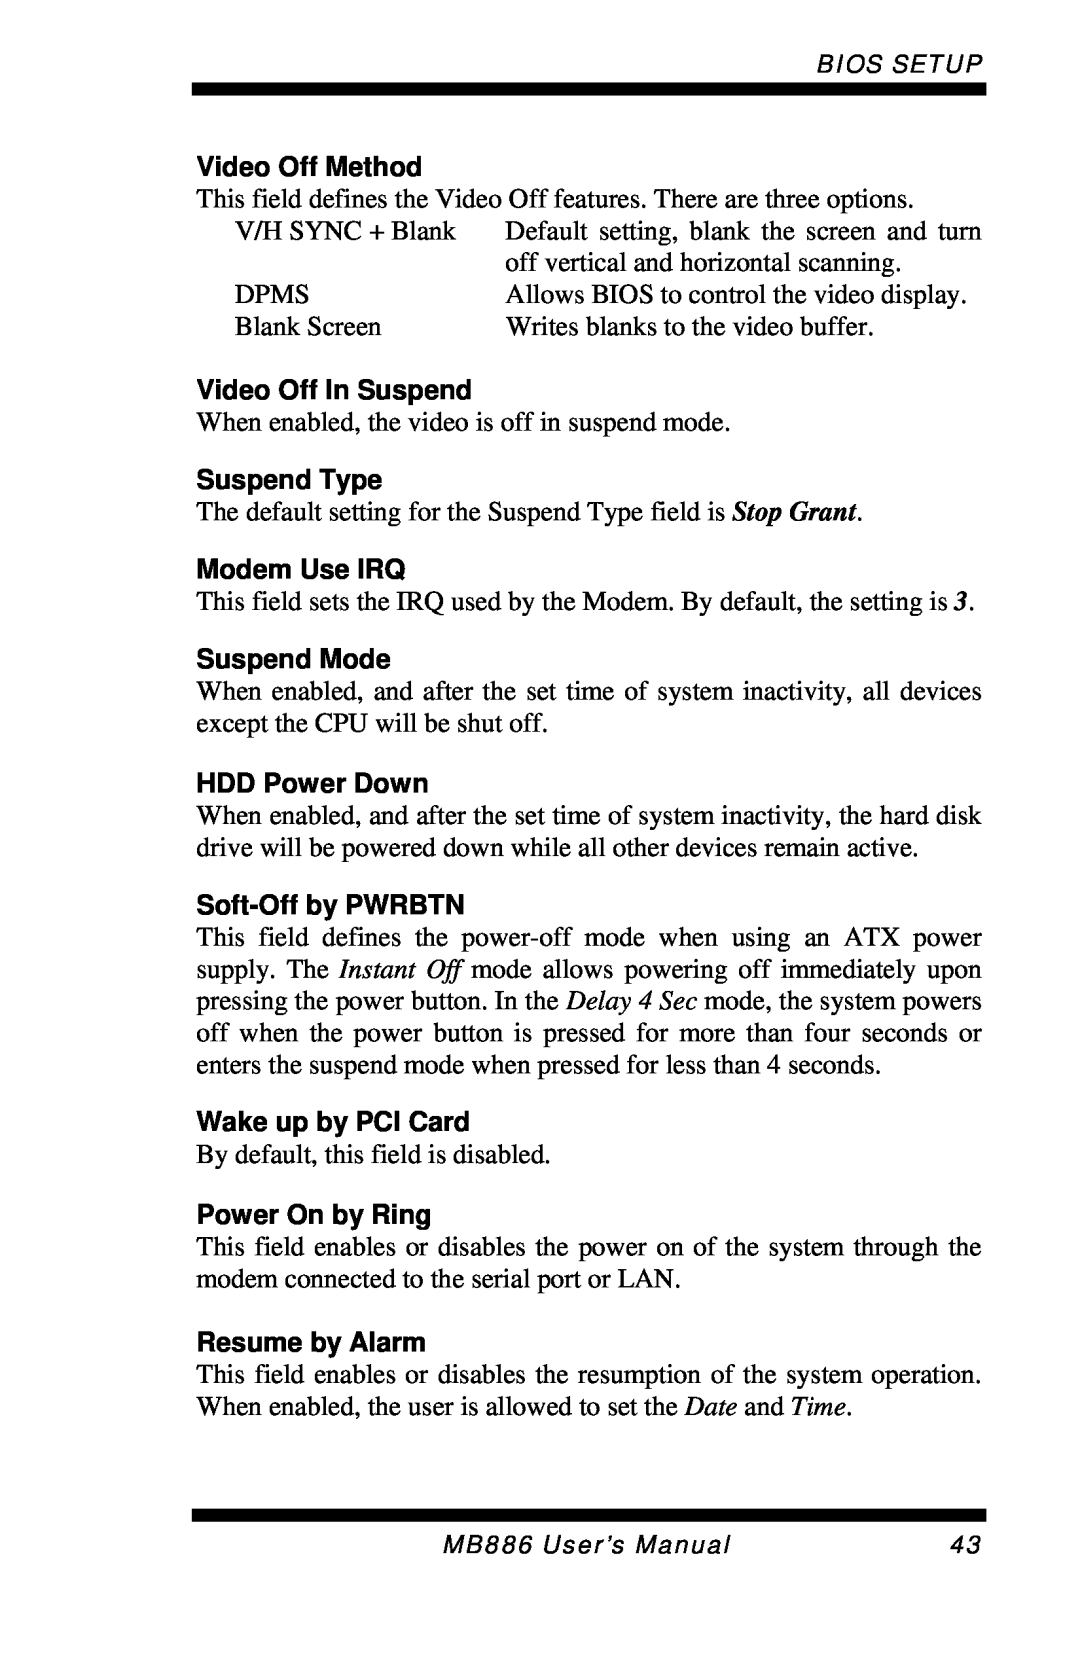 Intel MB886 user manual Video Off Method, Video Off In Suspend, Suspend Type, Modem Use IRQ, Suspend Mode, HDD Power Down 